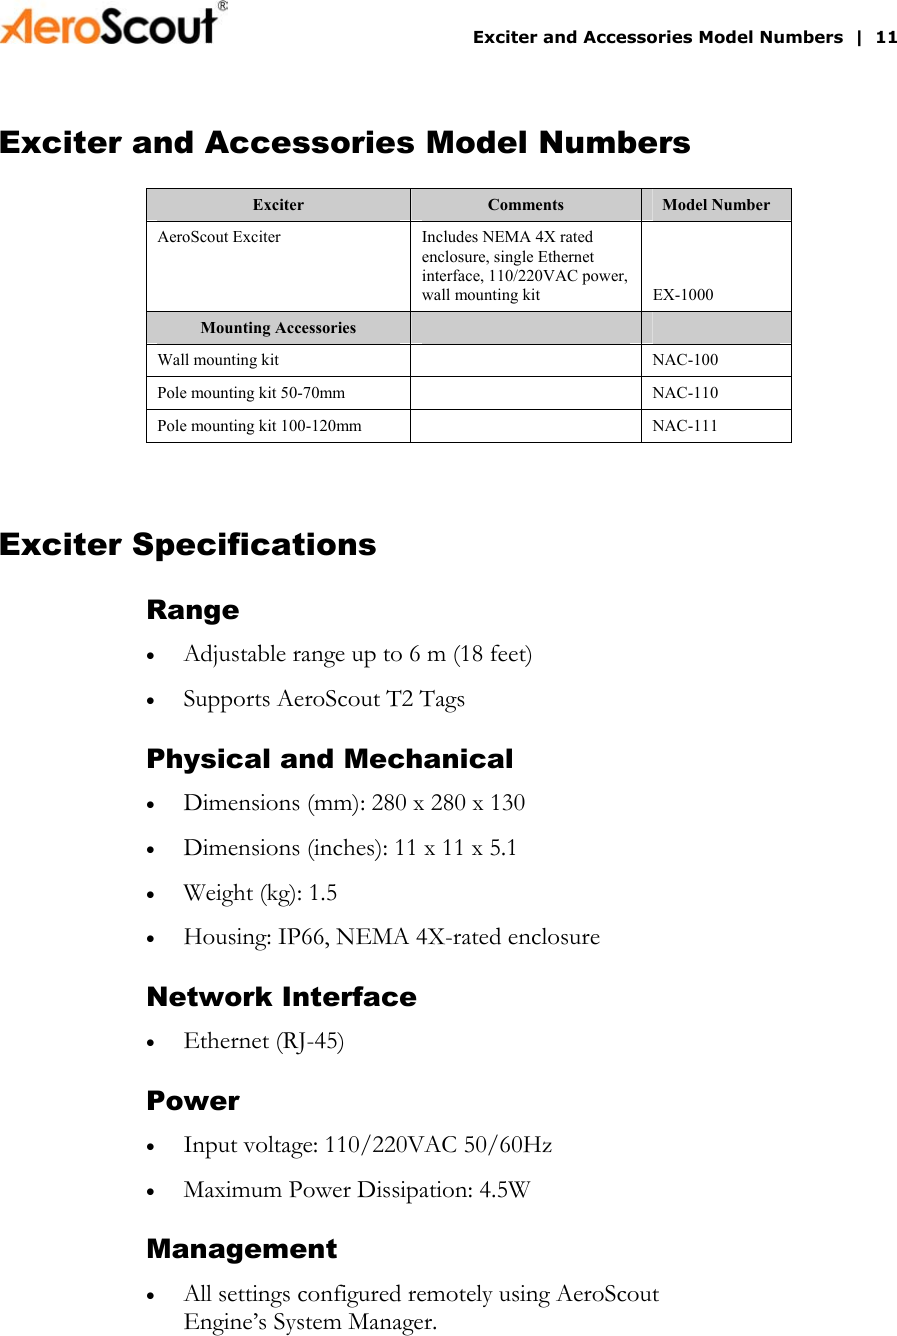       Exciter and Accessories Model Numbers  |  11 Exciter and Accessories Model Numbers Exciter  Comments  Model Number AeroScout Exciter  Includes NEMA 4X rated enclosure, single Ethernet interface, 110/220VAC power, wall mounting kit  EX-1000 Mounting Accessories     Wall mounting kit    NAC-100 Pole mounting kit 50-70mm    NAC-110 Pole mounting kit 100-120mm    NAC-111  Exciter Specifications Range • • • • • • • • • • Adjustable range up to 6 m (18 feet) Supports AeroScout T2 Tags Physical and Mechanical Dimensions (mm): 280 x 280 x 130 Dimensions (inches): 11 x 11 x 5.1 Weight (kg): 1.5 Housing: IP66, NEMA 4X-rated enclosure Network Interface Ethernet (RJ-45) Power Input voltage: 110/220VAC 50/60Hz Maximum Power Dissipation: 4.5W Management All settings configured remotely using AeroScout Engine’s System Manager. 